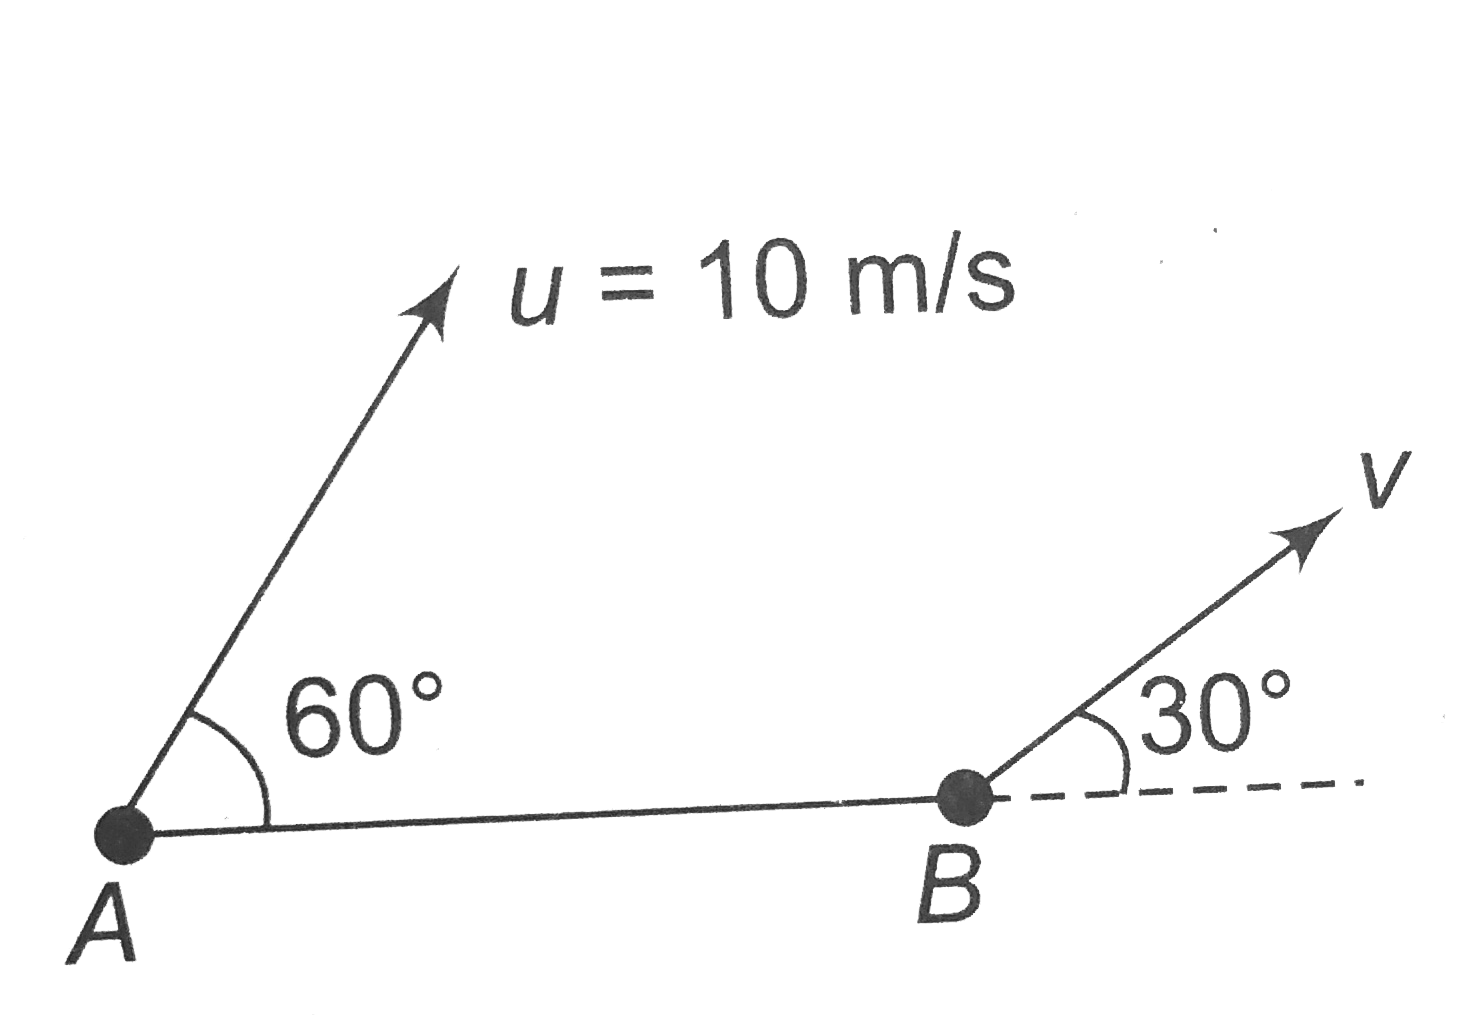 Two particles A and B are situated at a distance d = 2m apart. Particle A has a velocity of 10 m//s at an angle of 60^@ and particle B has a velocity v at an angle 30^@ as shown in figure. The distance d between A and B is constant. the angular velocity of B with respect to A is :   .